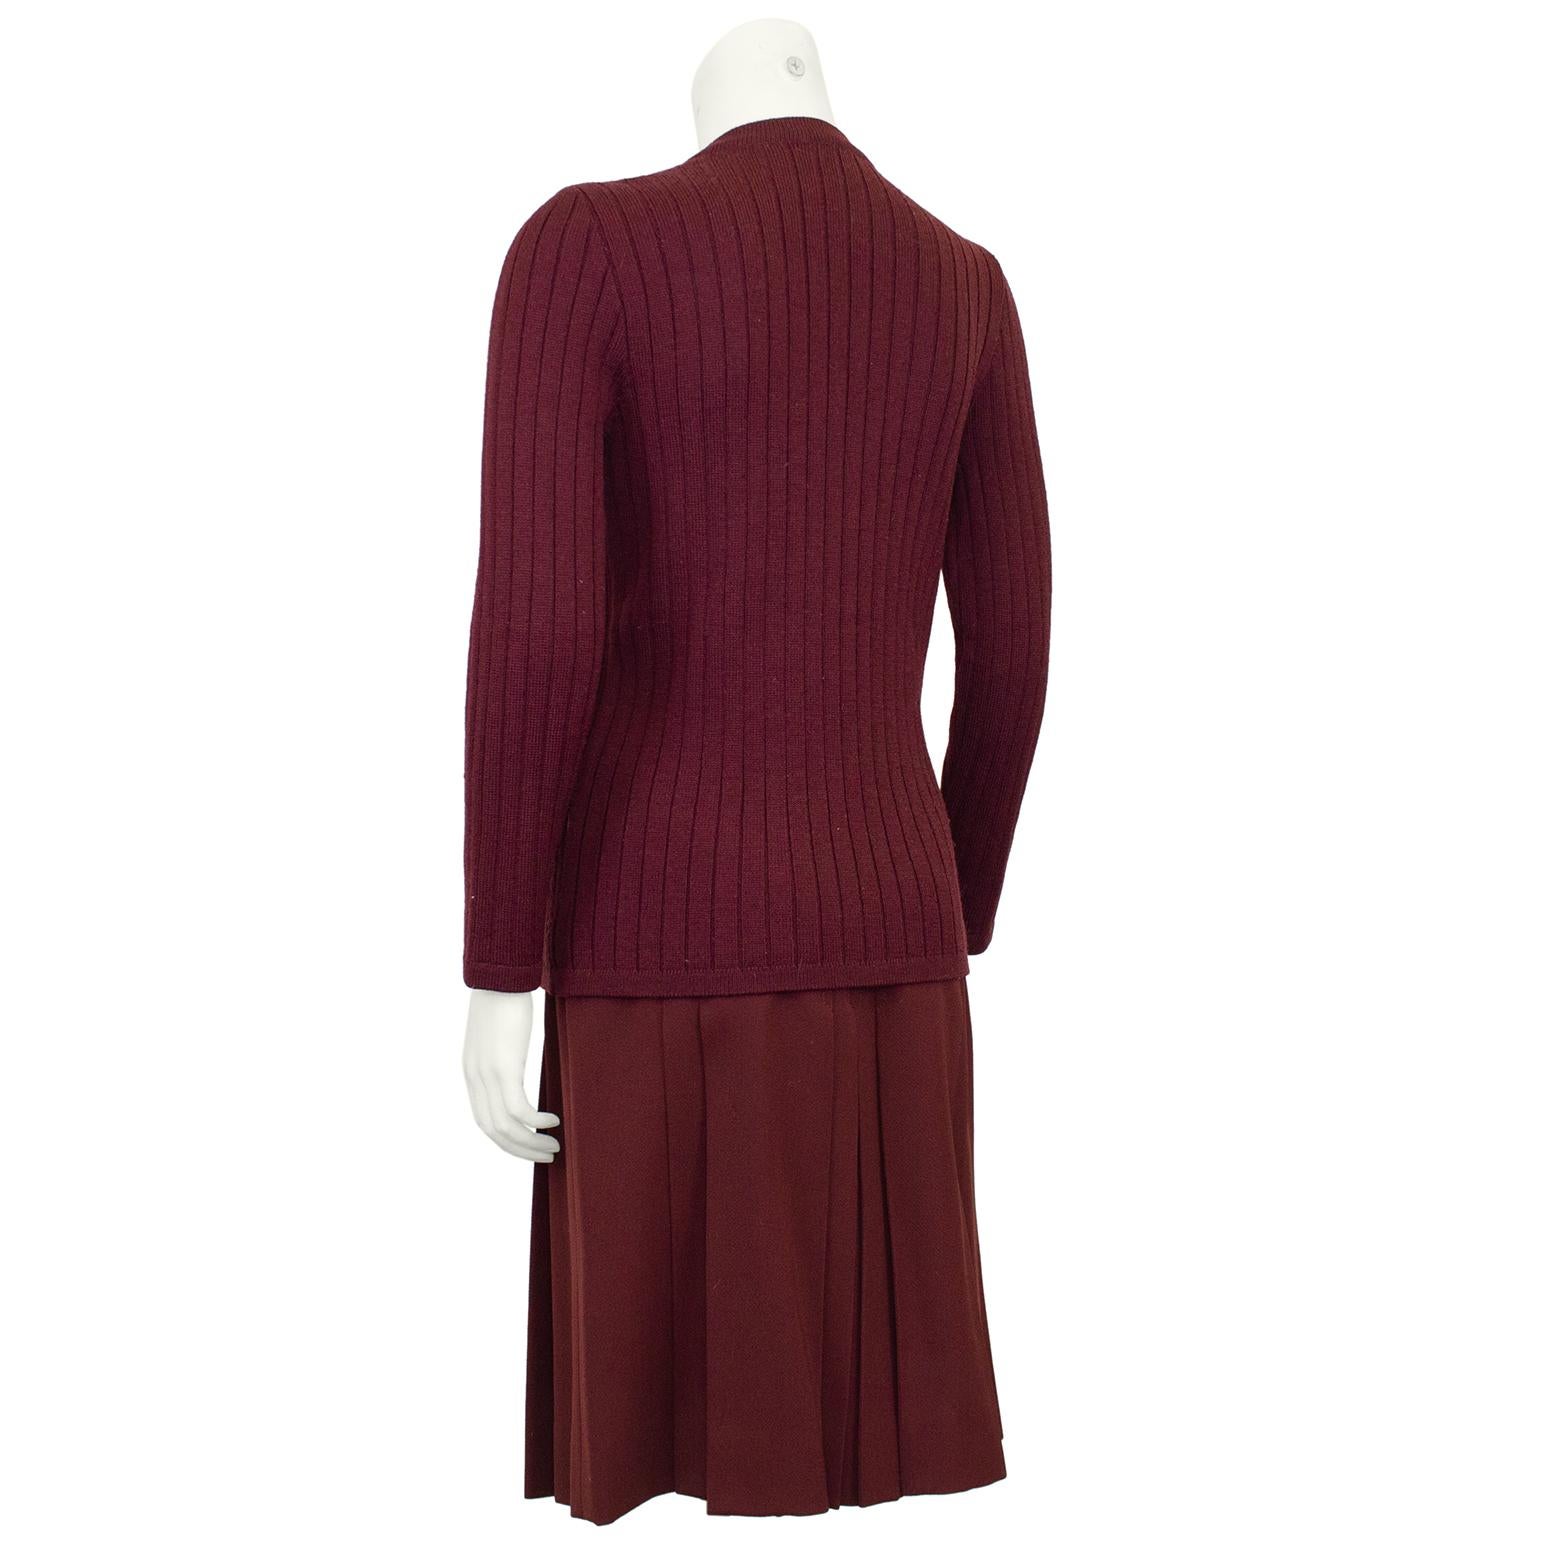 1970s Celine Maroon Wool Cardigan and Gabardine Skirt Ensemble In Good Condition For Sale In Toronto, Ontario